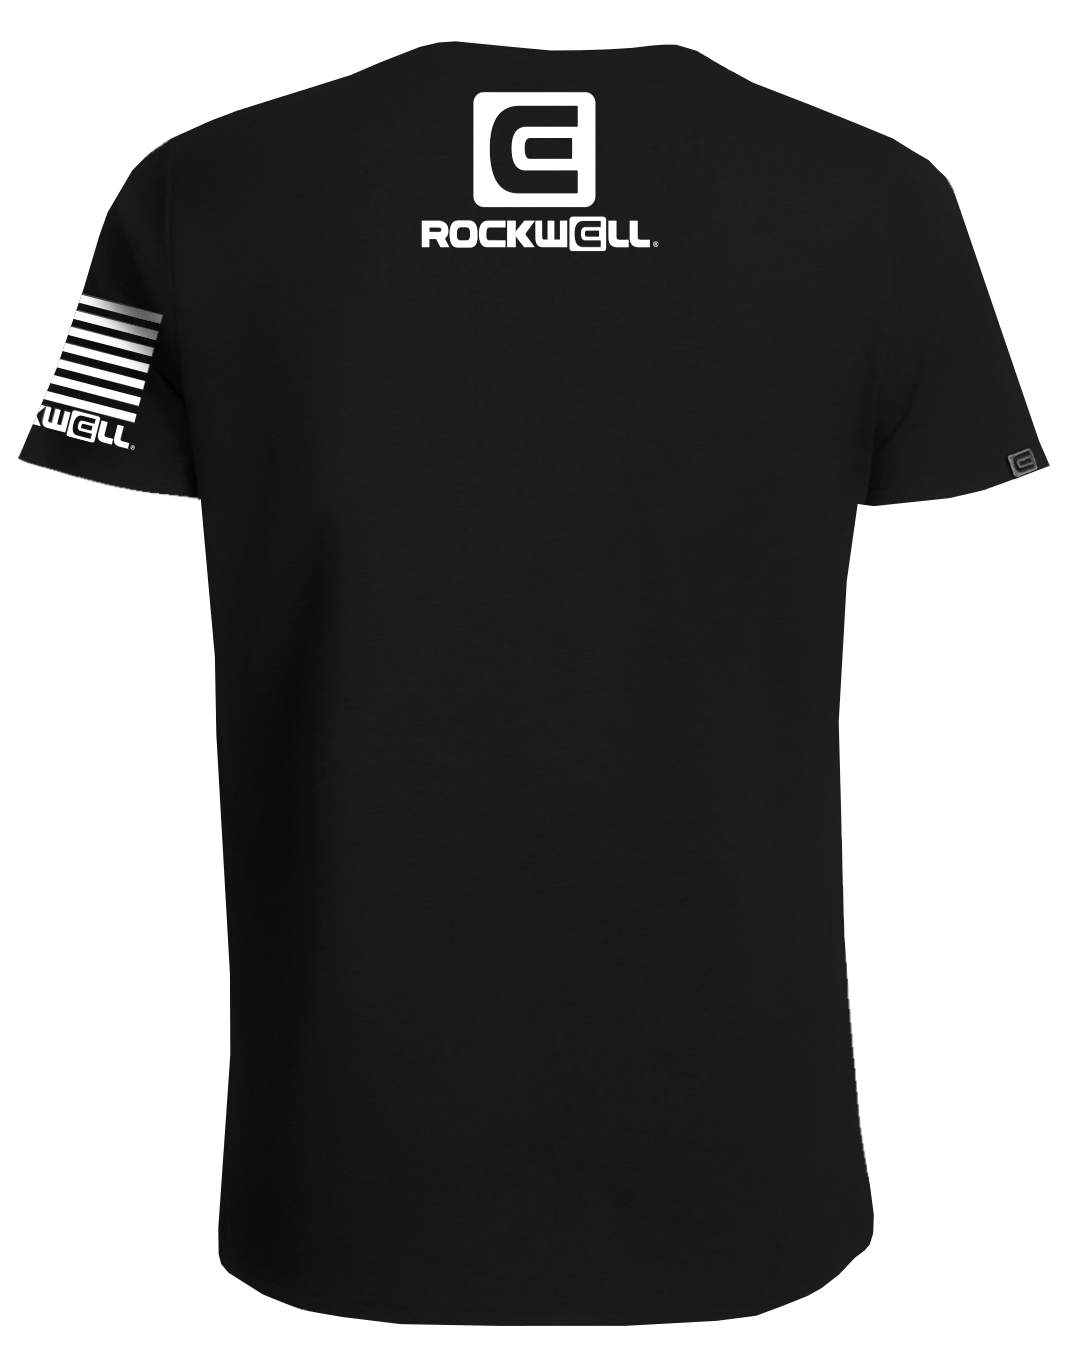 rockwell stacked logo on top of the back. rockwell flag logo on the sleeve